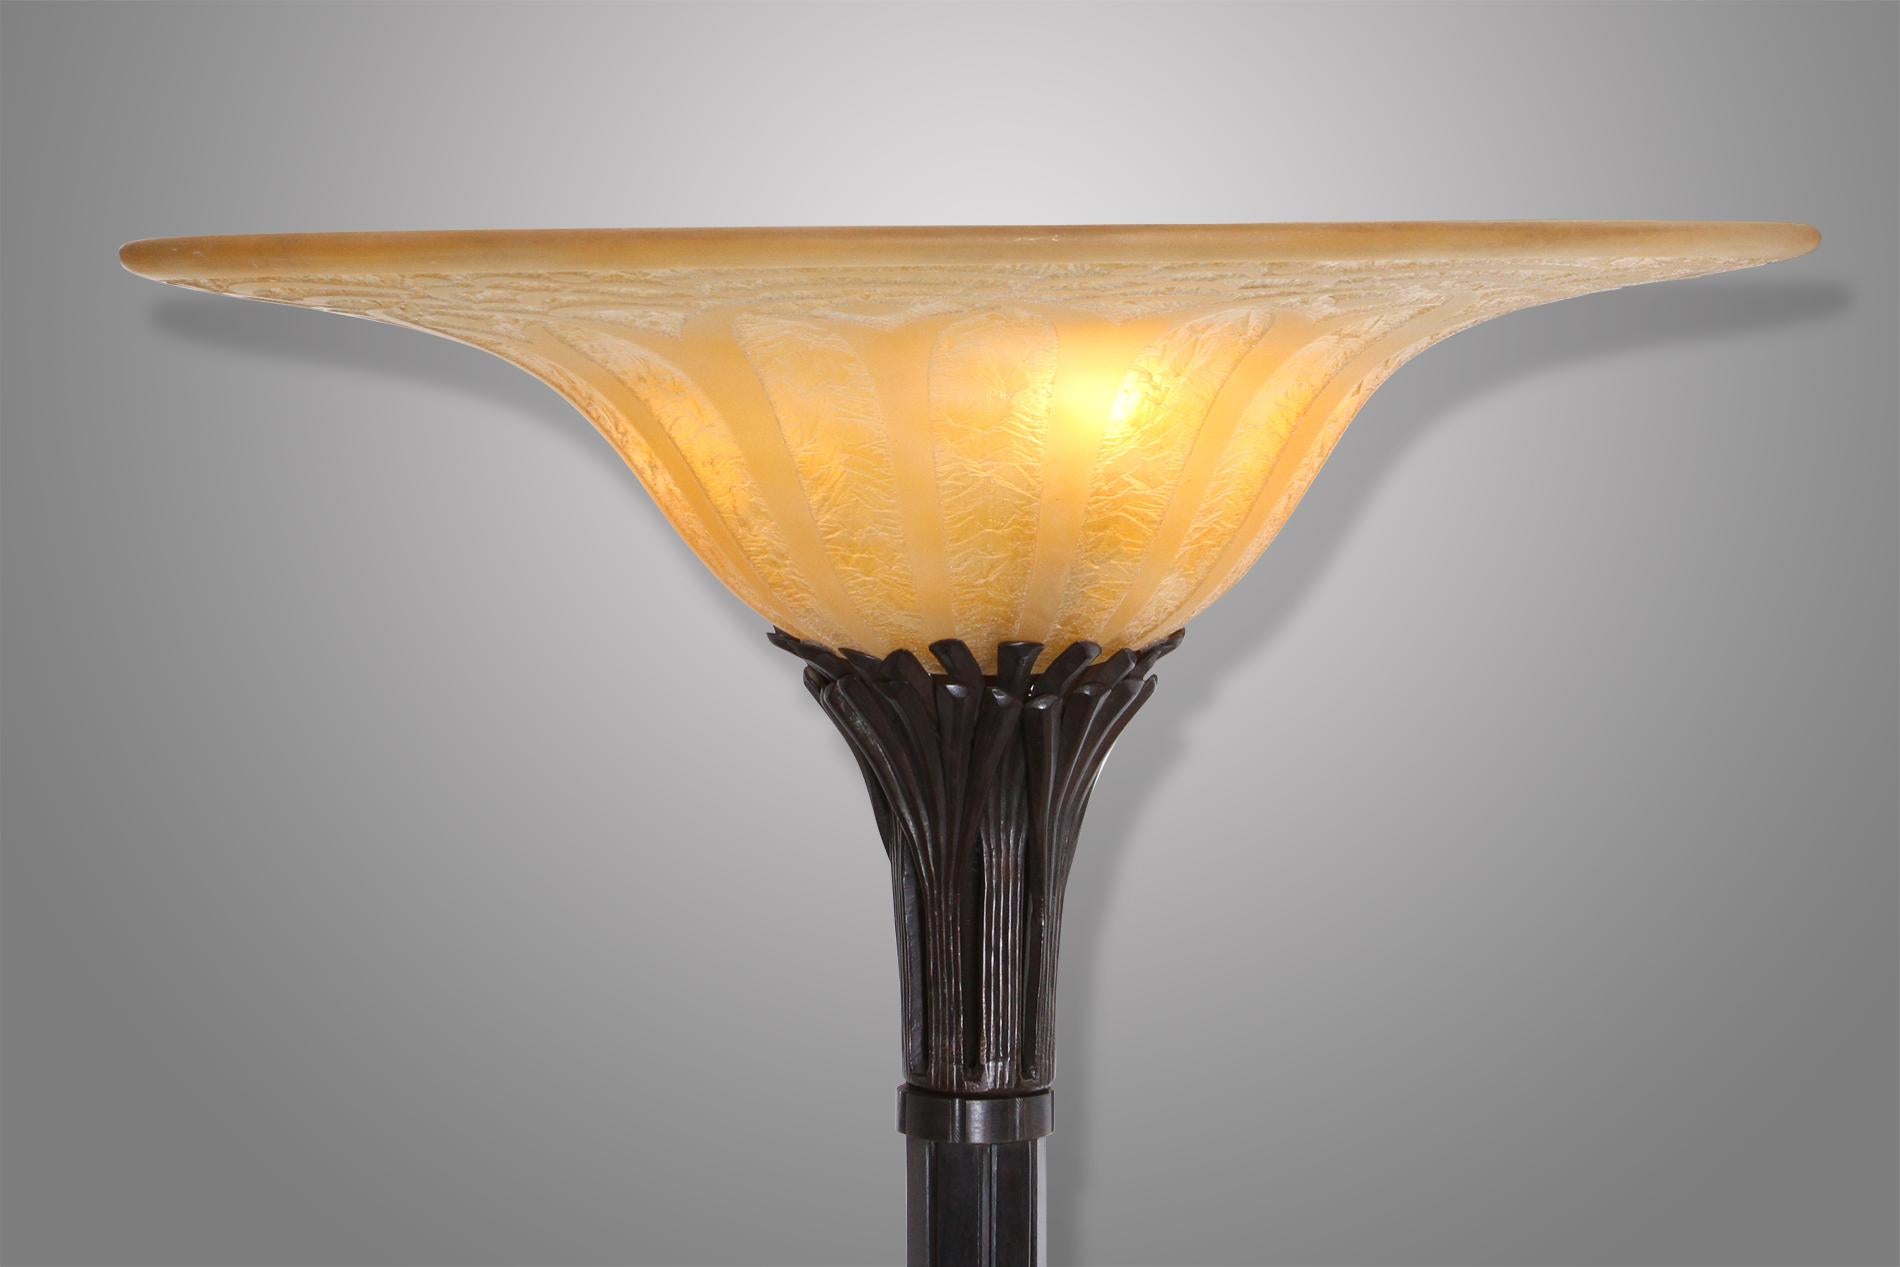 Really rare and exceptionnel torchiere by Raymond Subes from 1930. The piece is composed by an elegant hand-hammered wrought iron and a yellow Daum worked in rounded lines that can represent an almost floral decoration. 

The torchiere is also